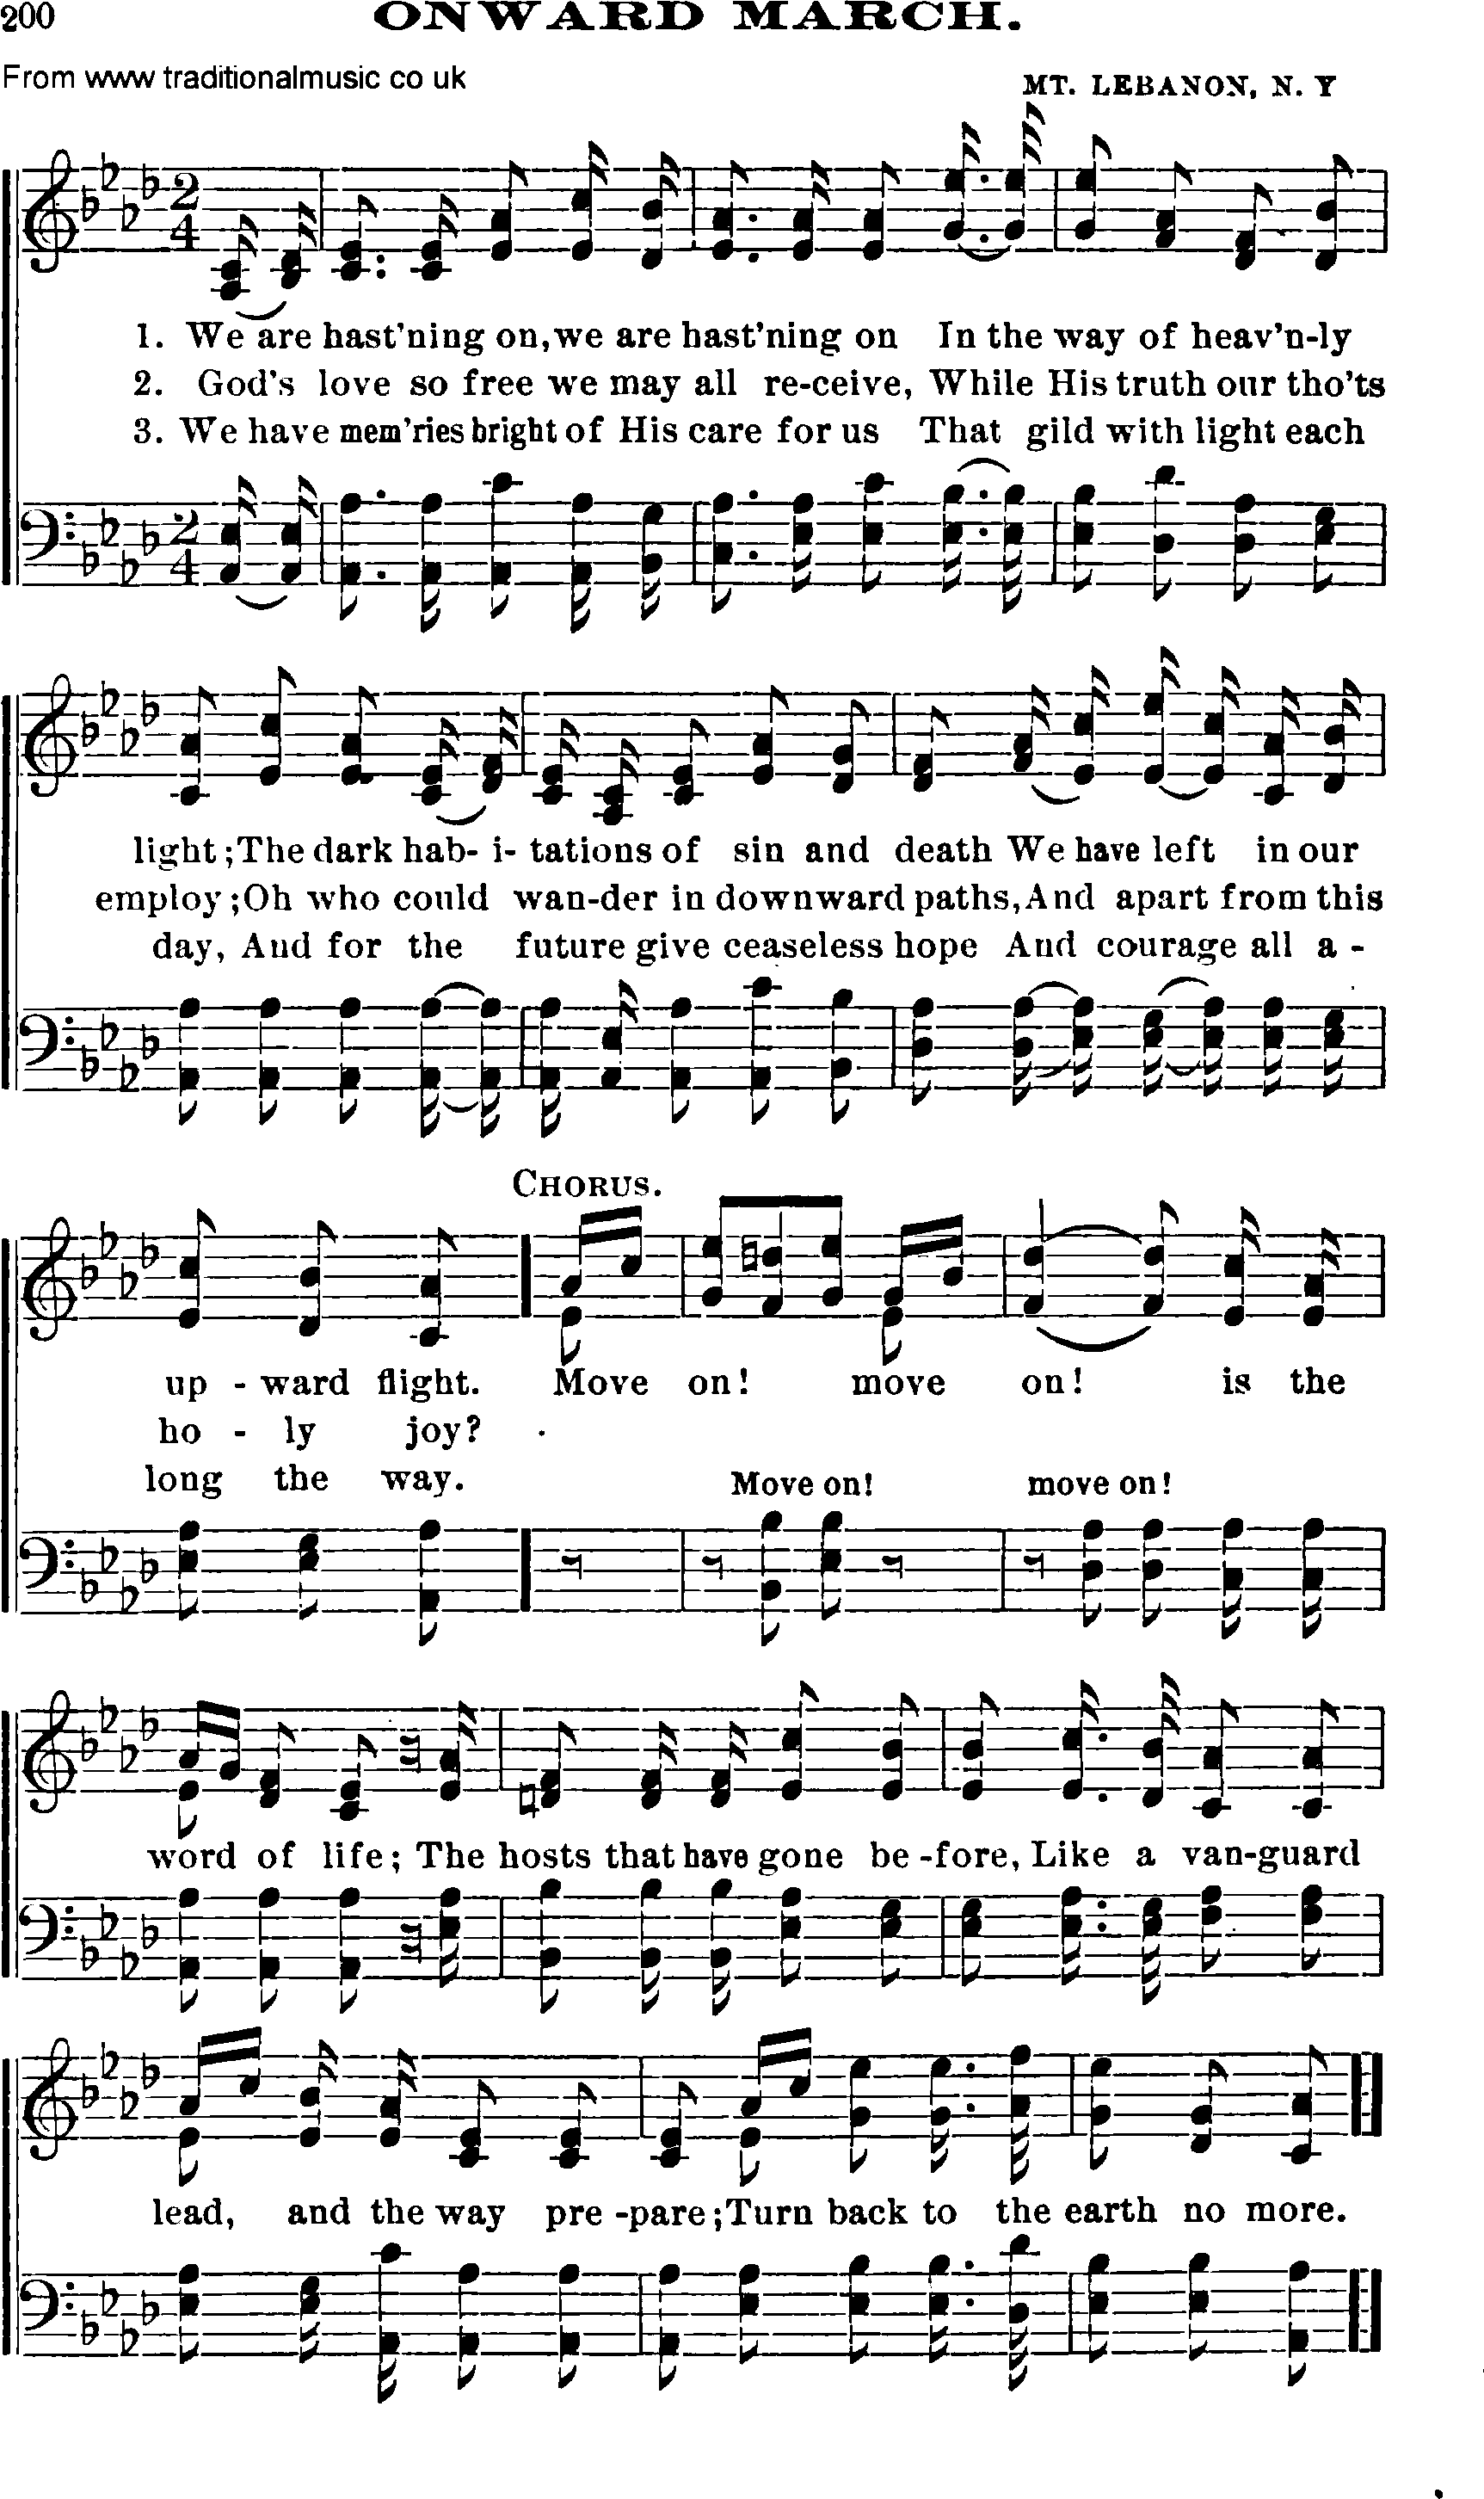 Shaker Music collection, Hymn: onward march, sheetmusic and PDF